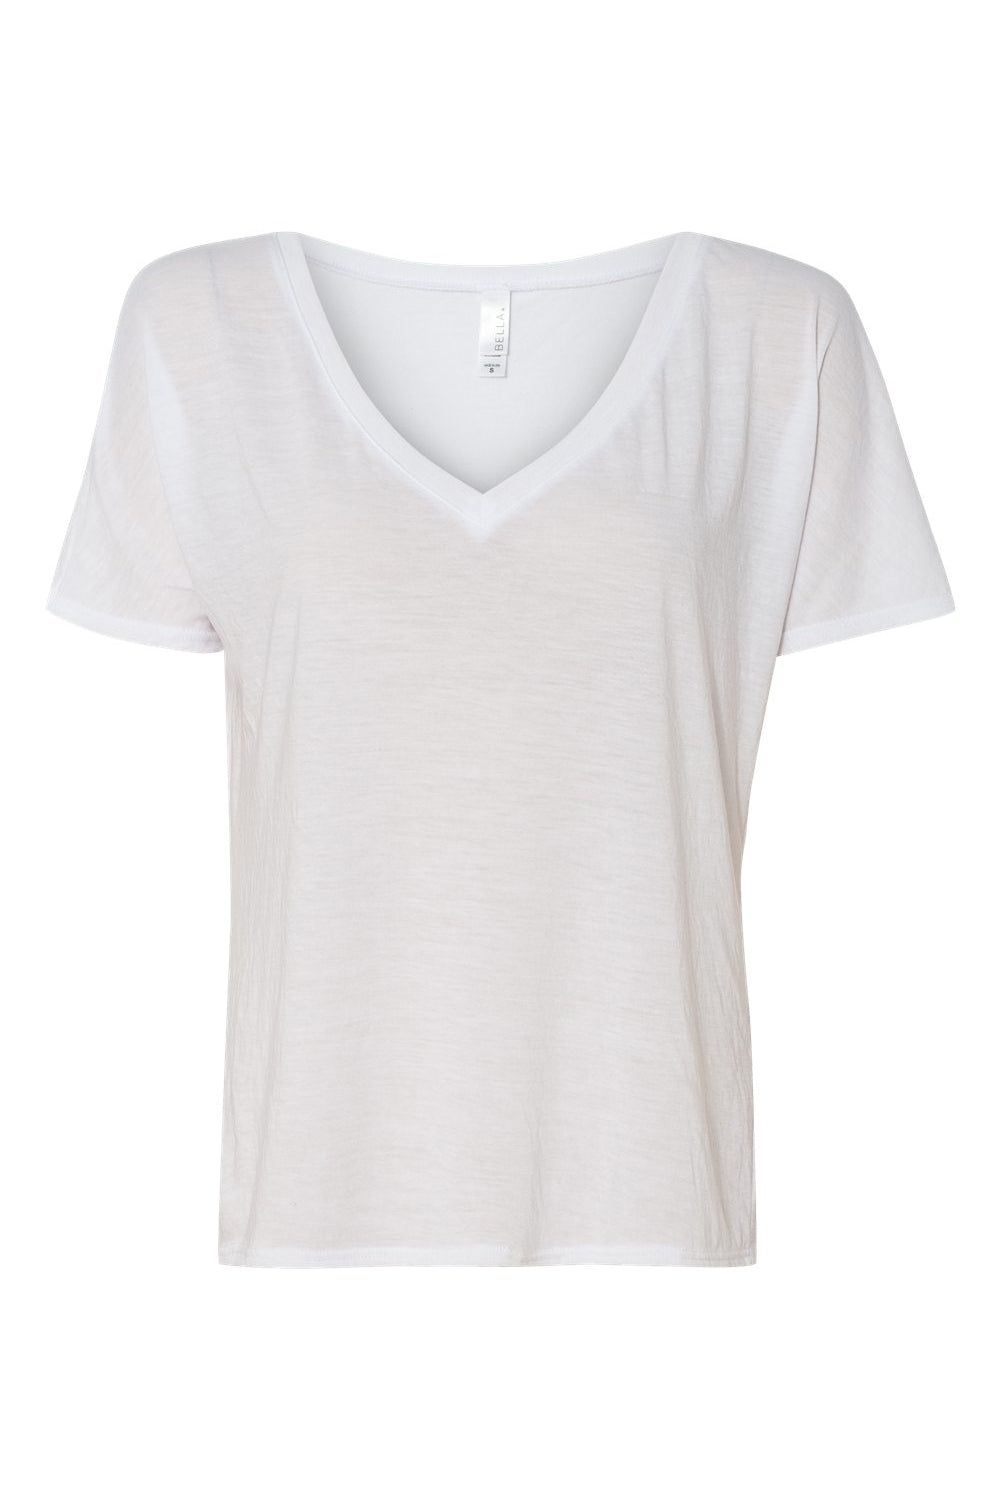 Bella + Canvas 8815 Womens Slouchy Short Sleeve V-Neck T-Shirt White Flat Front